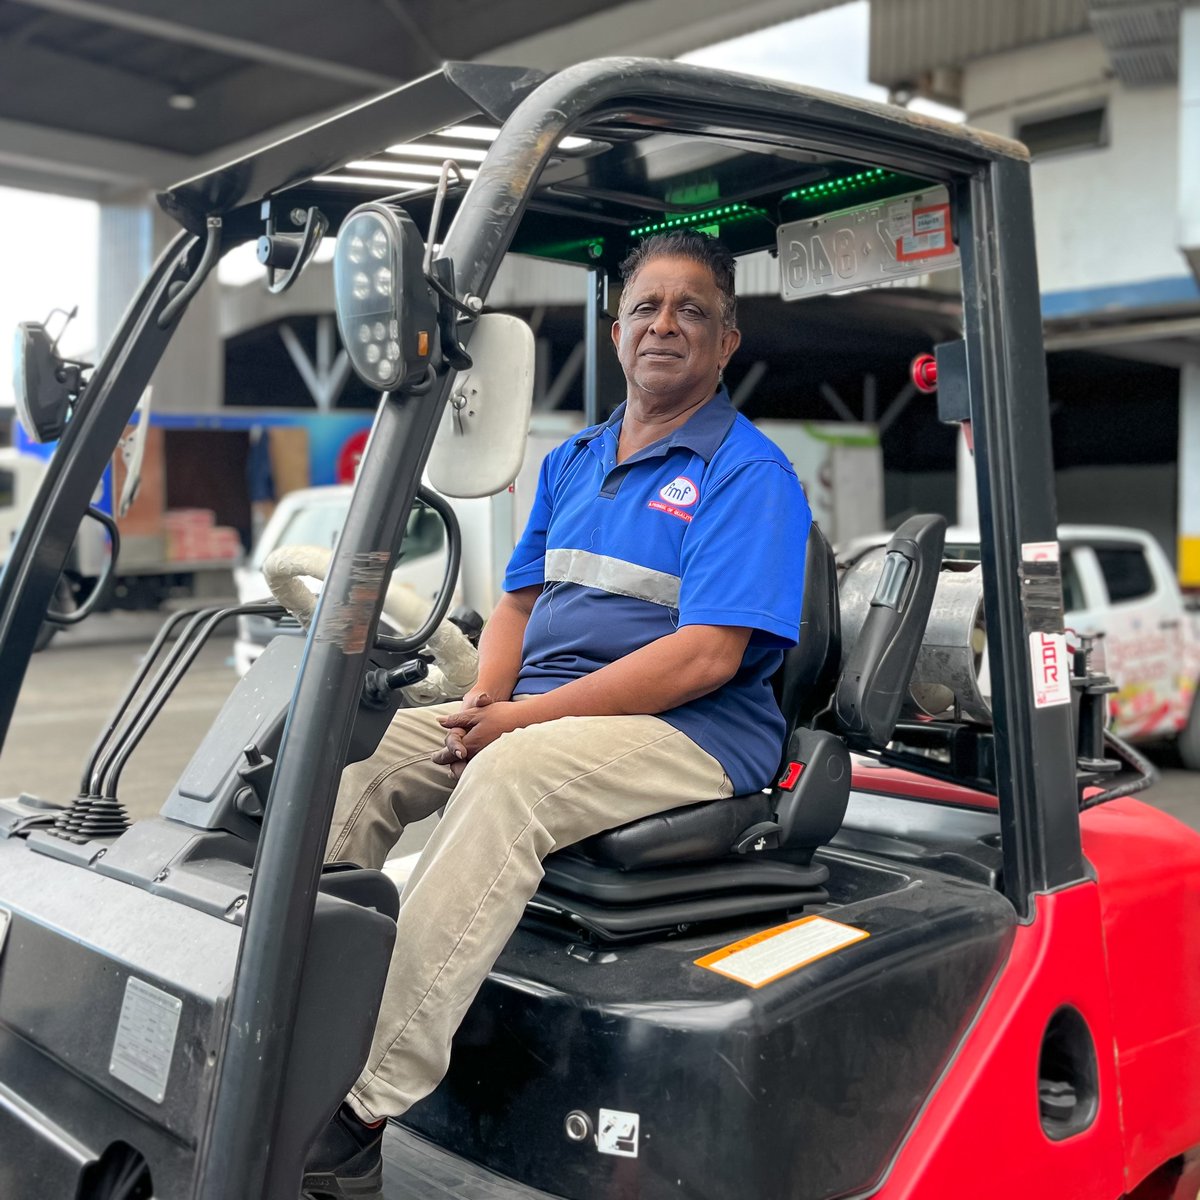 Meet Rudra Nand, a 70-year-old Forklift Operator at FMF Warehouse with over 30 years of loyal service.

#FMF #LongService #People